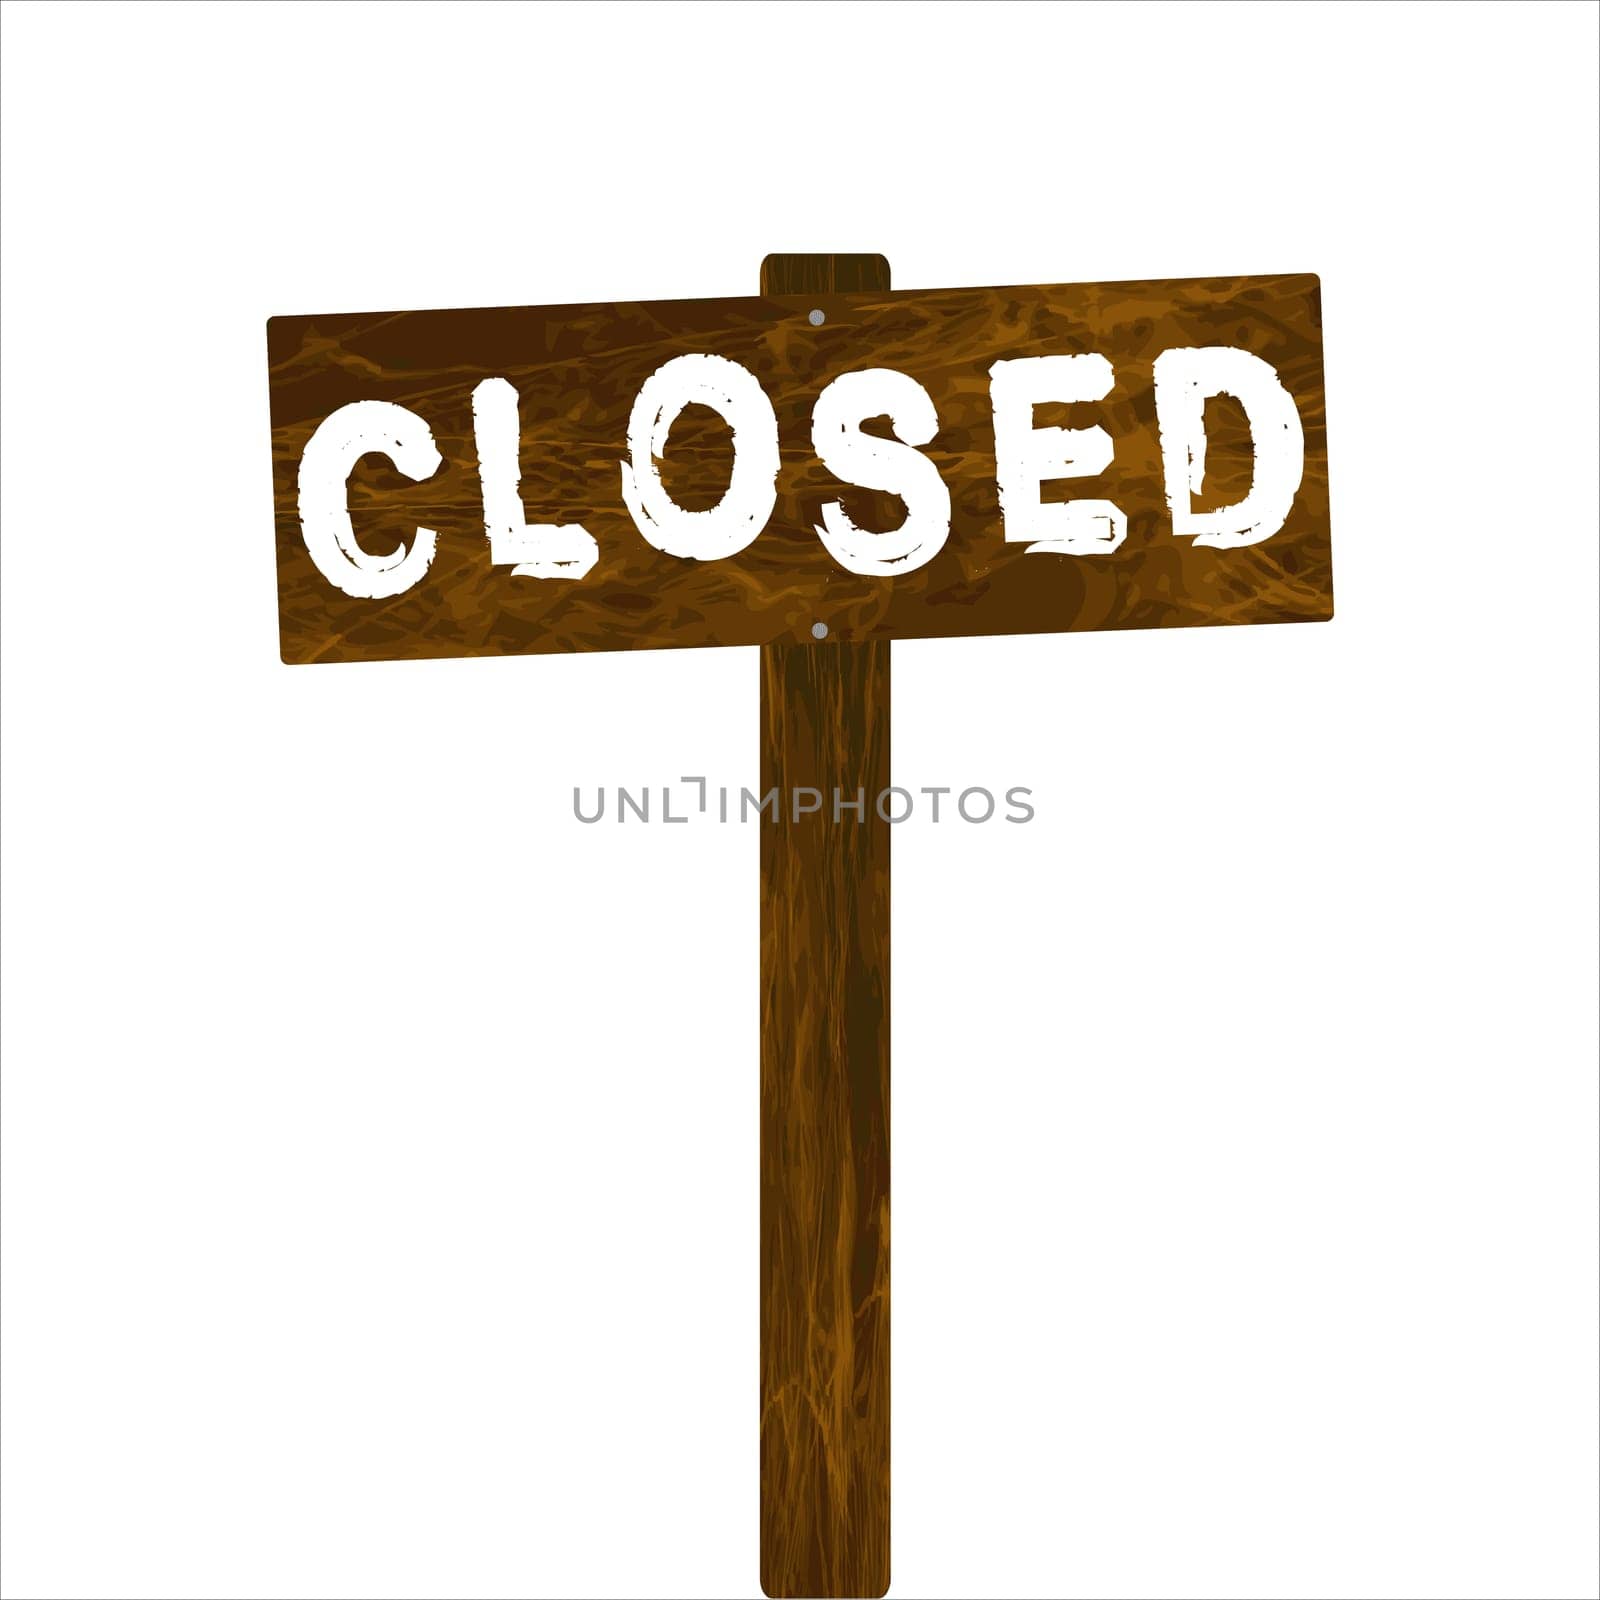 Closed wooden sign isolated on white background by hibrida13